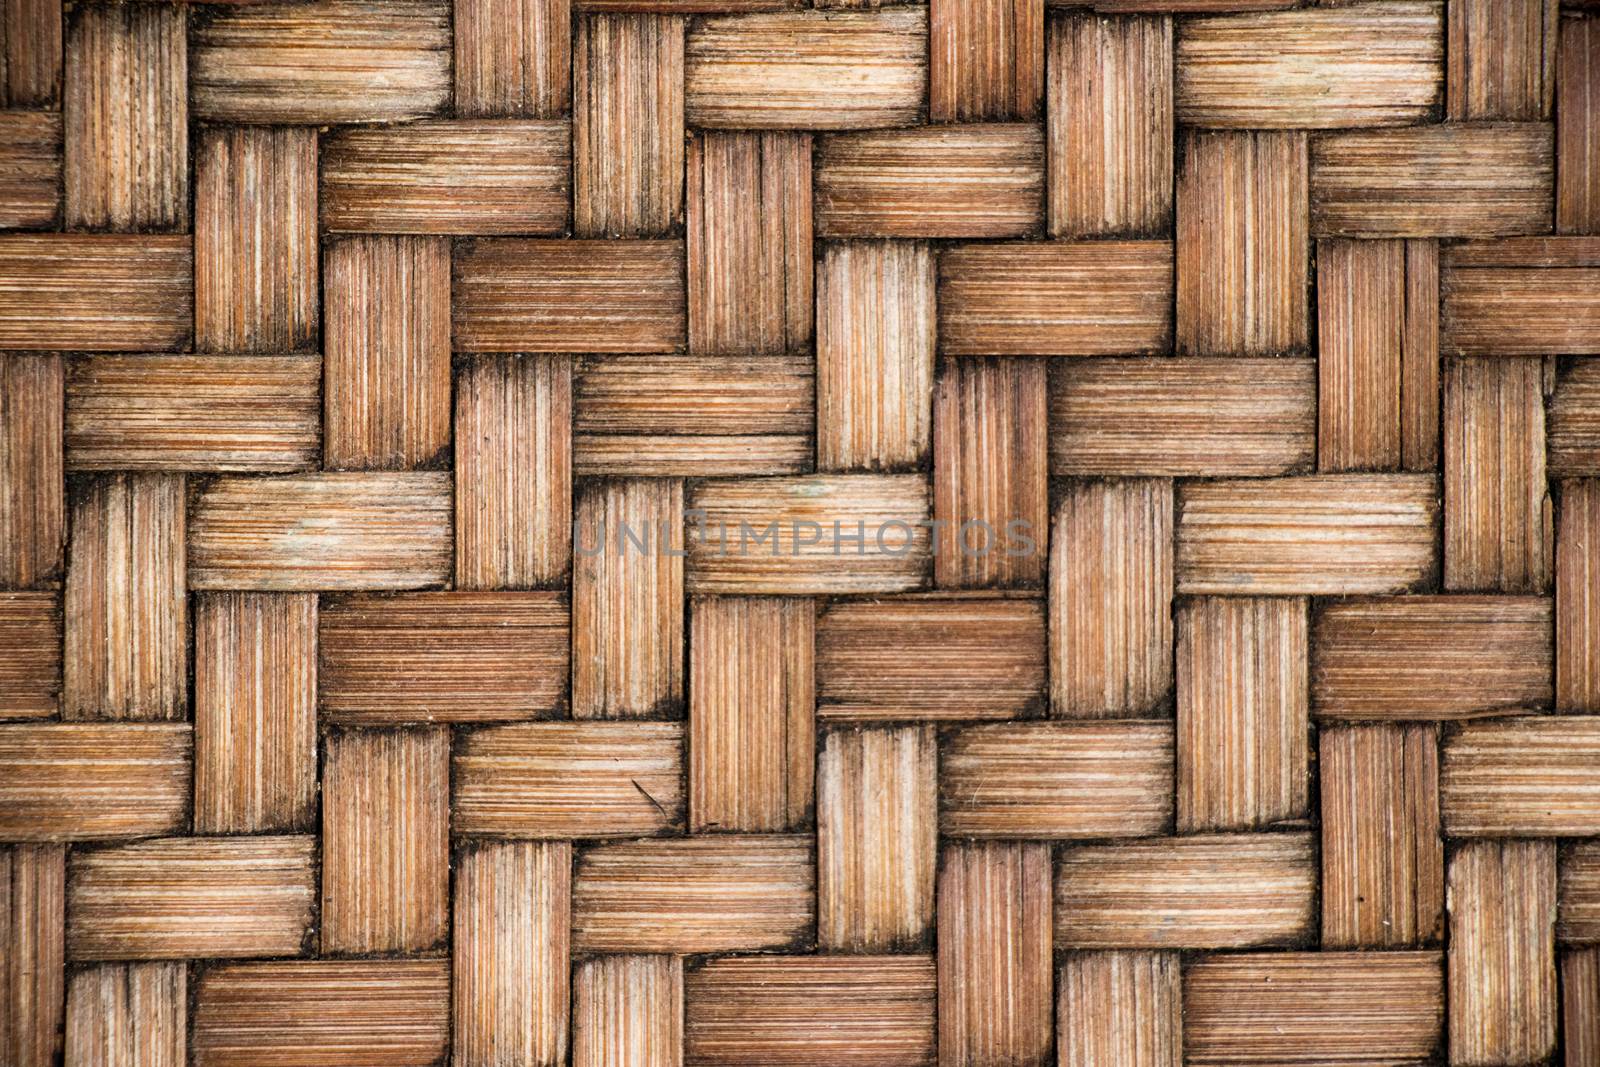 Closed up of brown color wooden weave texture background